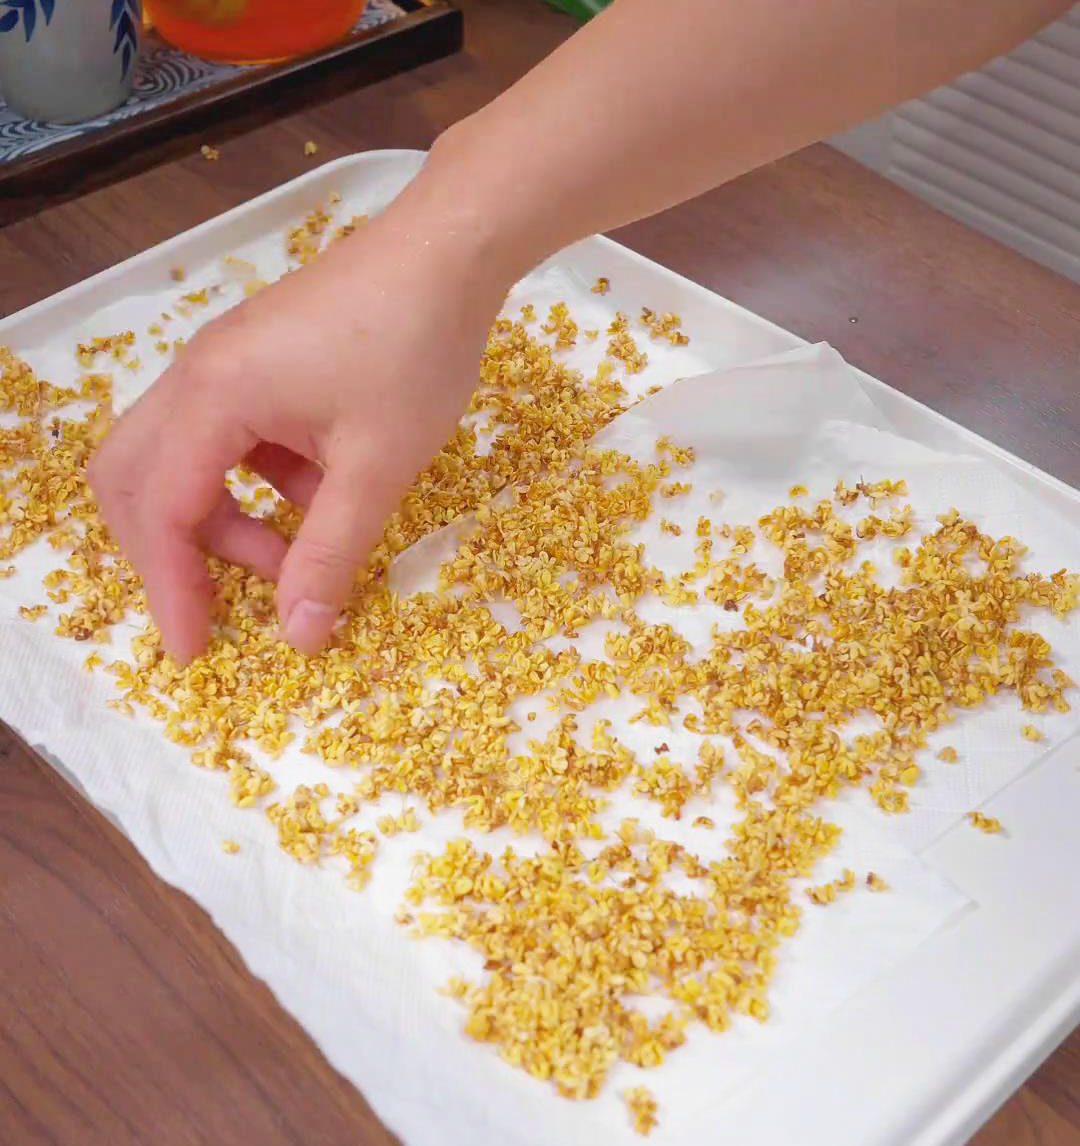 Let osmanthus flowers dry on a tray with paper towels